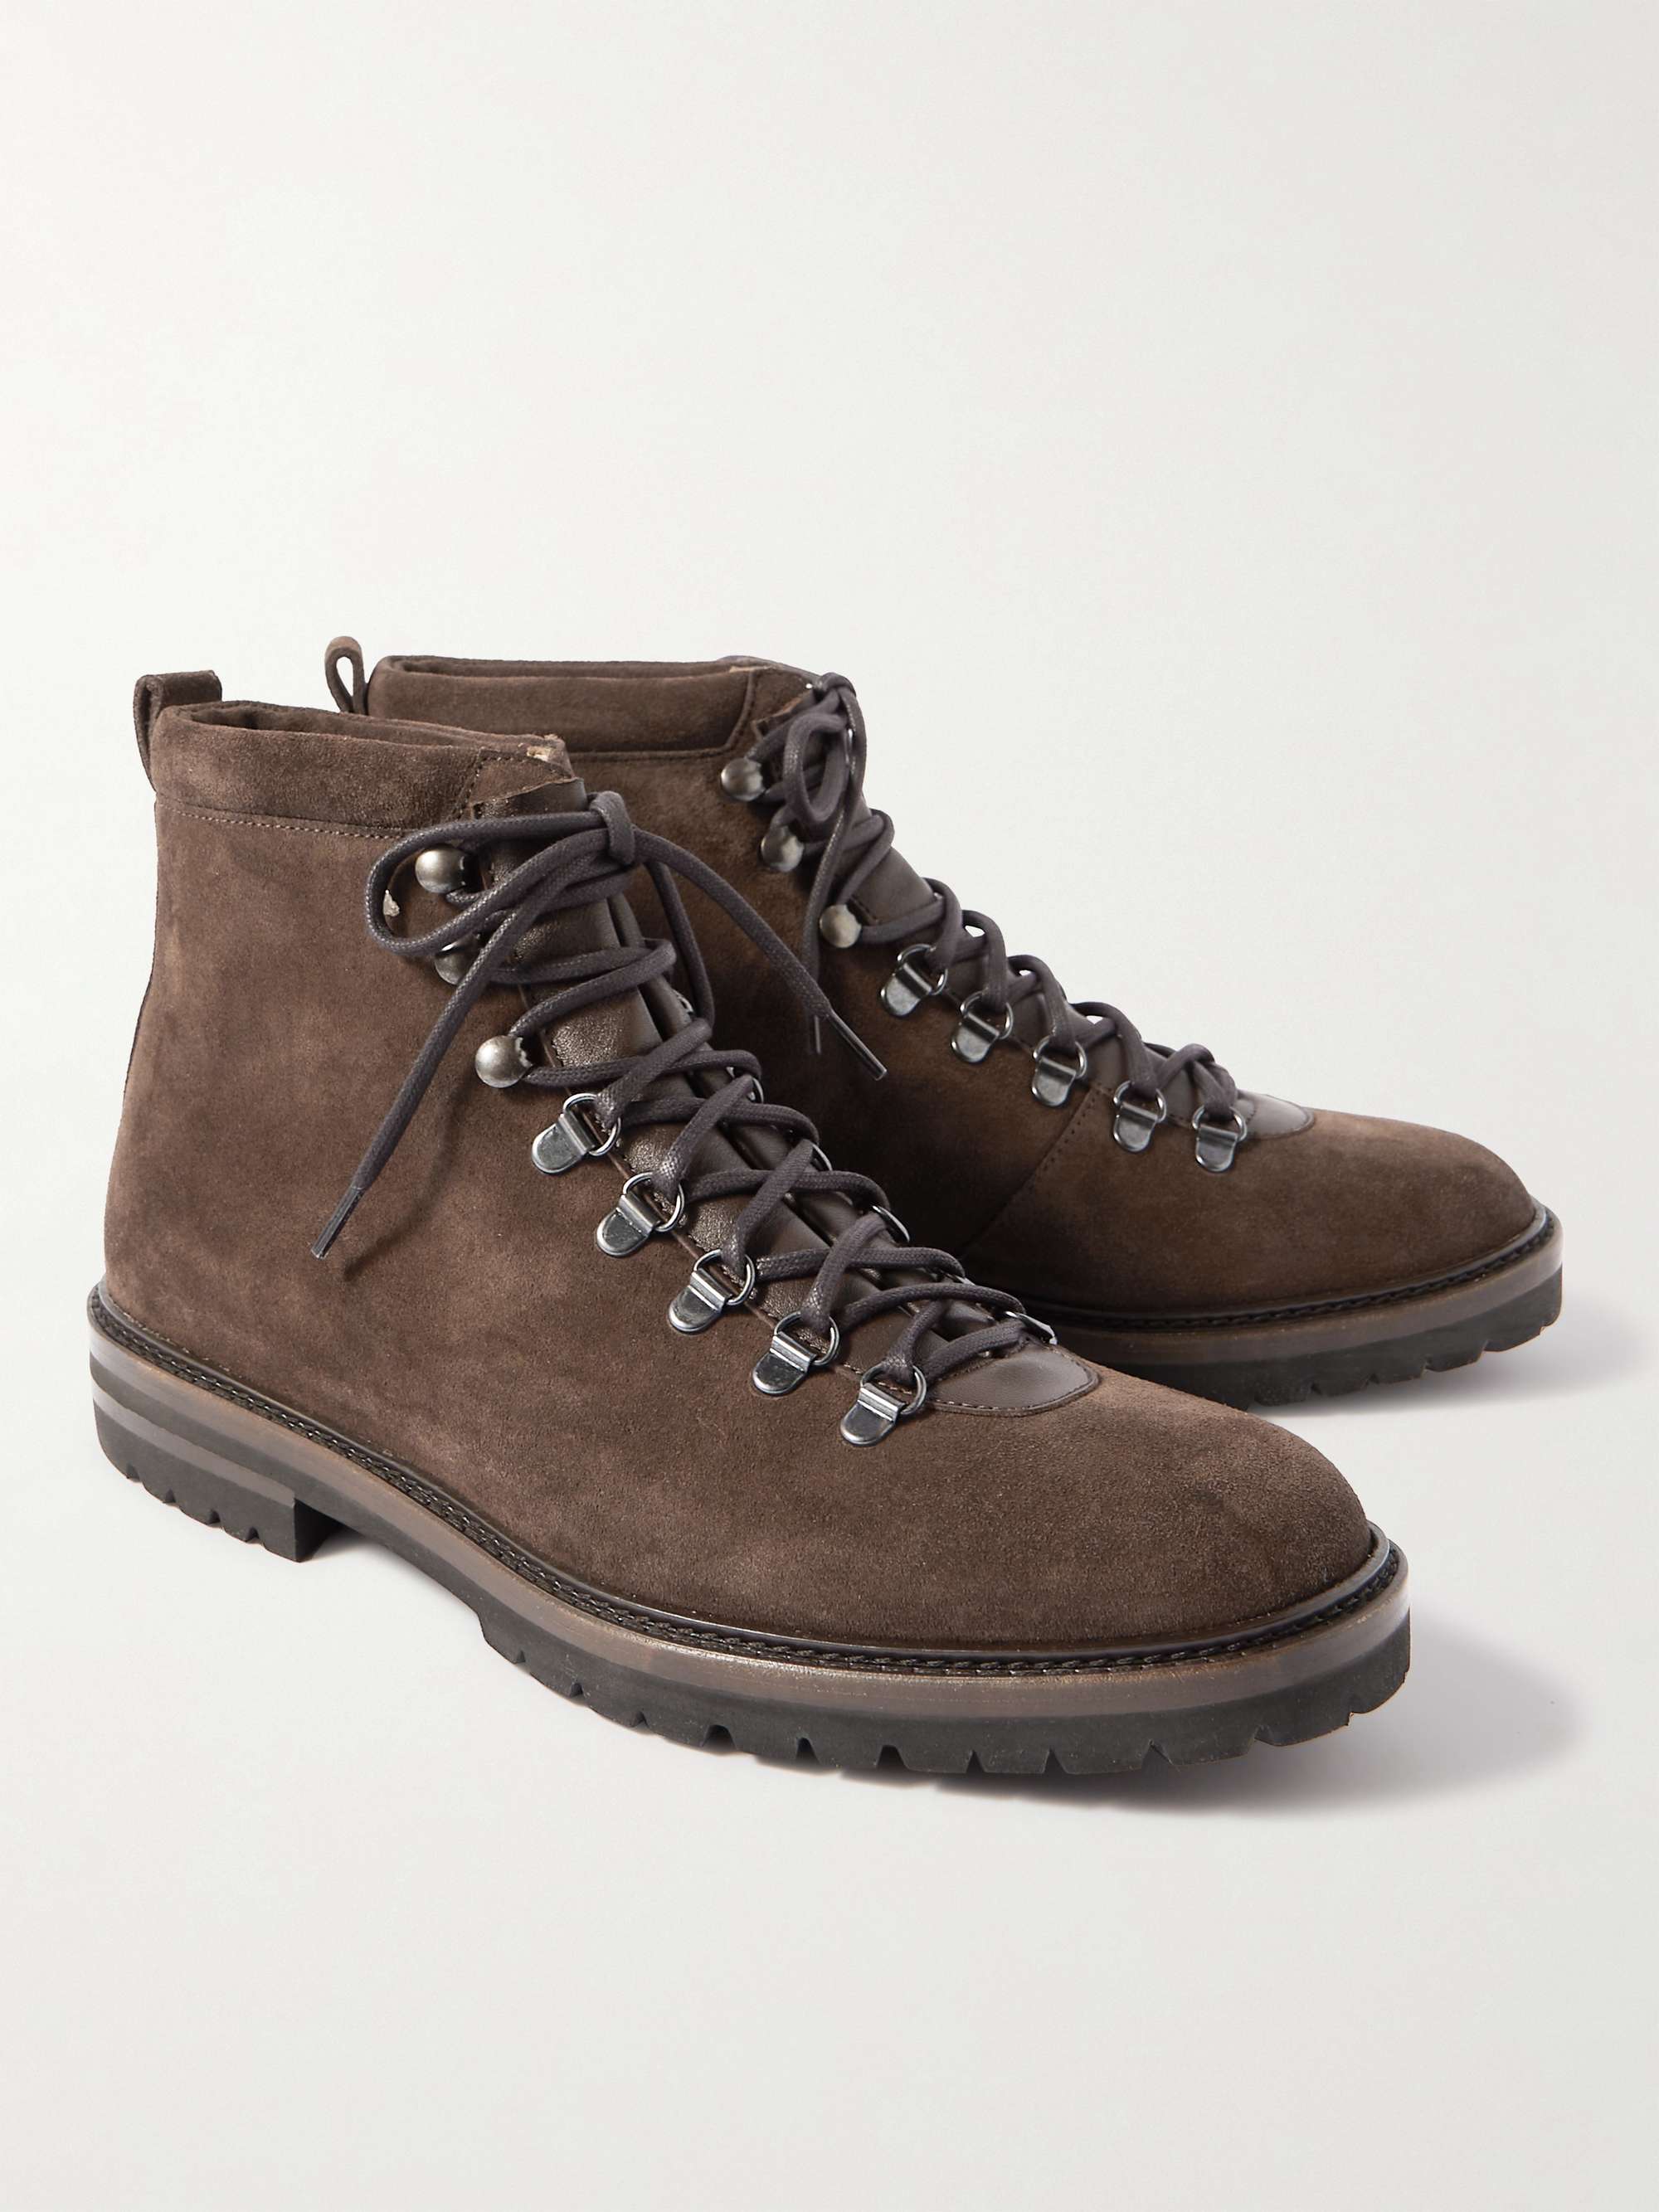 MANOLO BLAHNIK Caluario Leather-Trimmed Suede Hiking Boots for Men | MR ...